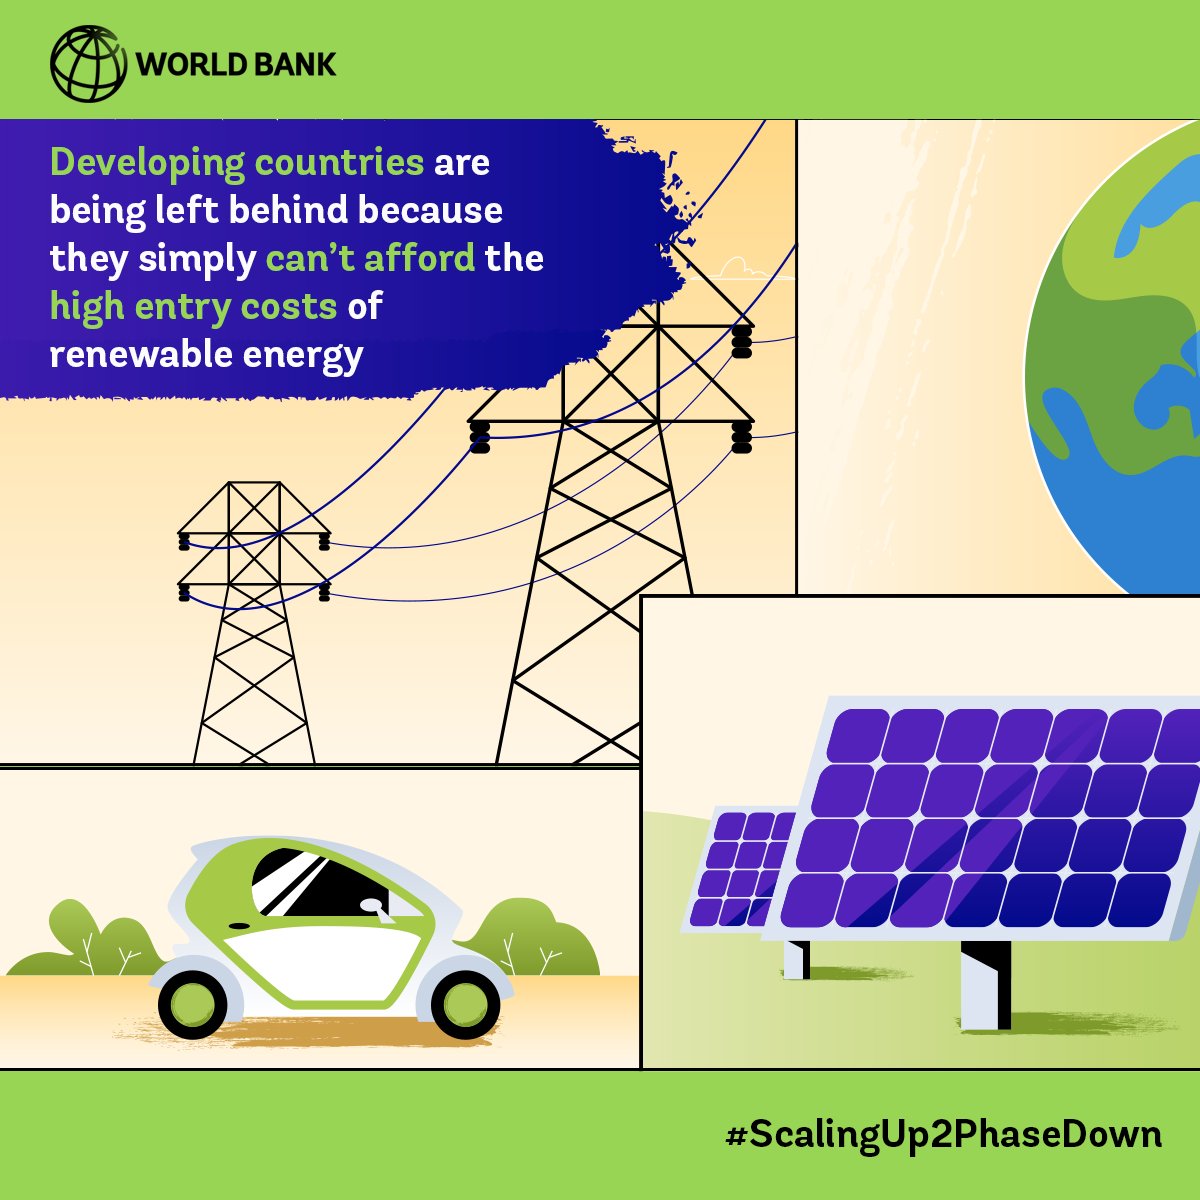 Without access to more and affordable capital, low and middle-income countries risk being locked out of clean sources of electricity such as solar and wind, along with projects to improve energy efficiency. wrld.bg/yLAB50NY4L5 #ScalingUp2PhaseDown #ReThinkingEnergy